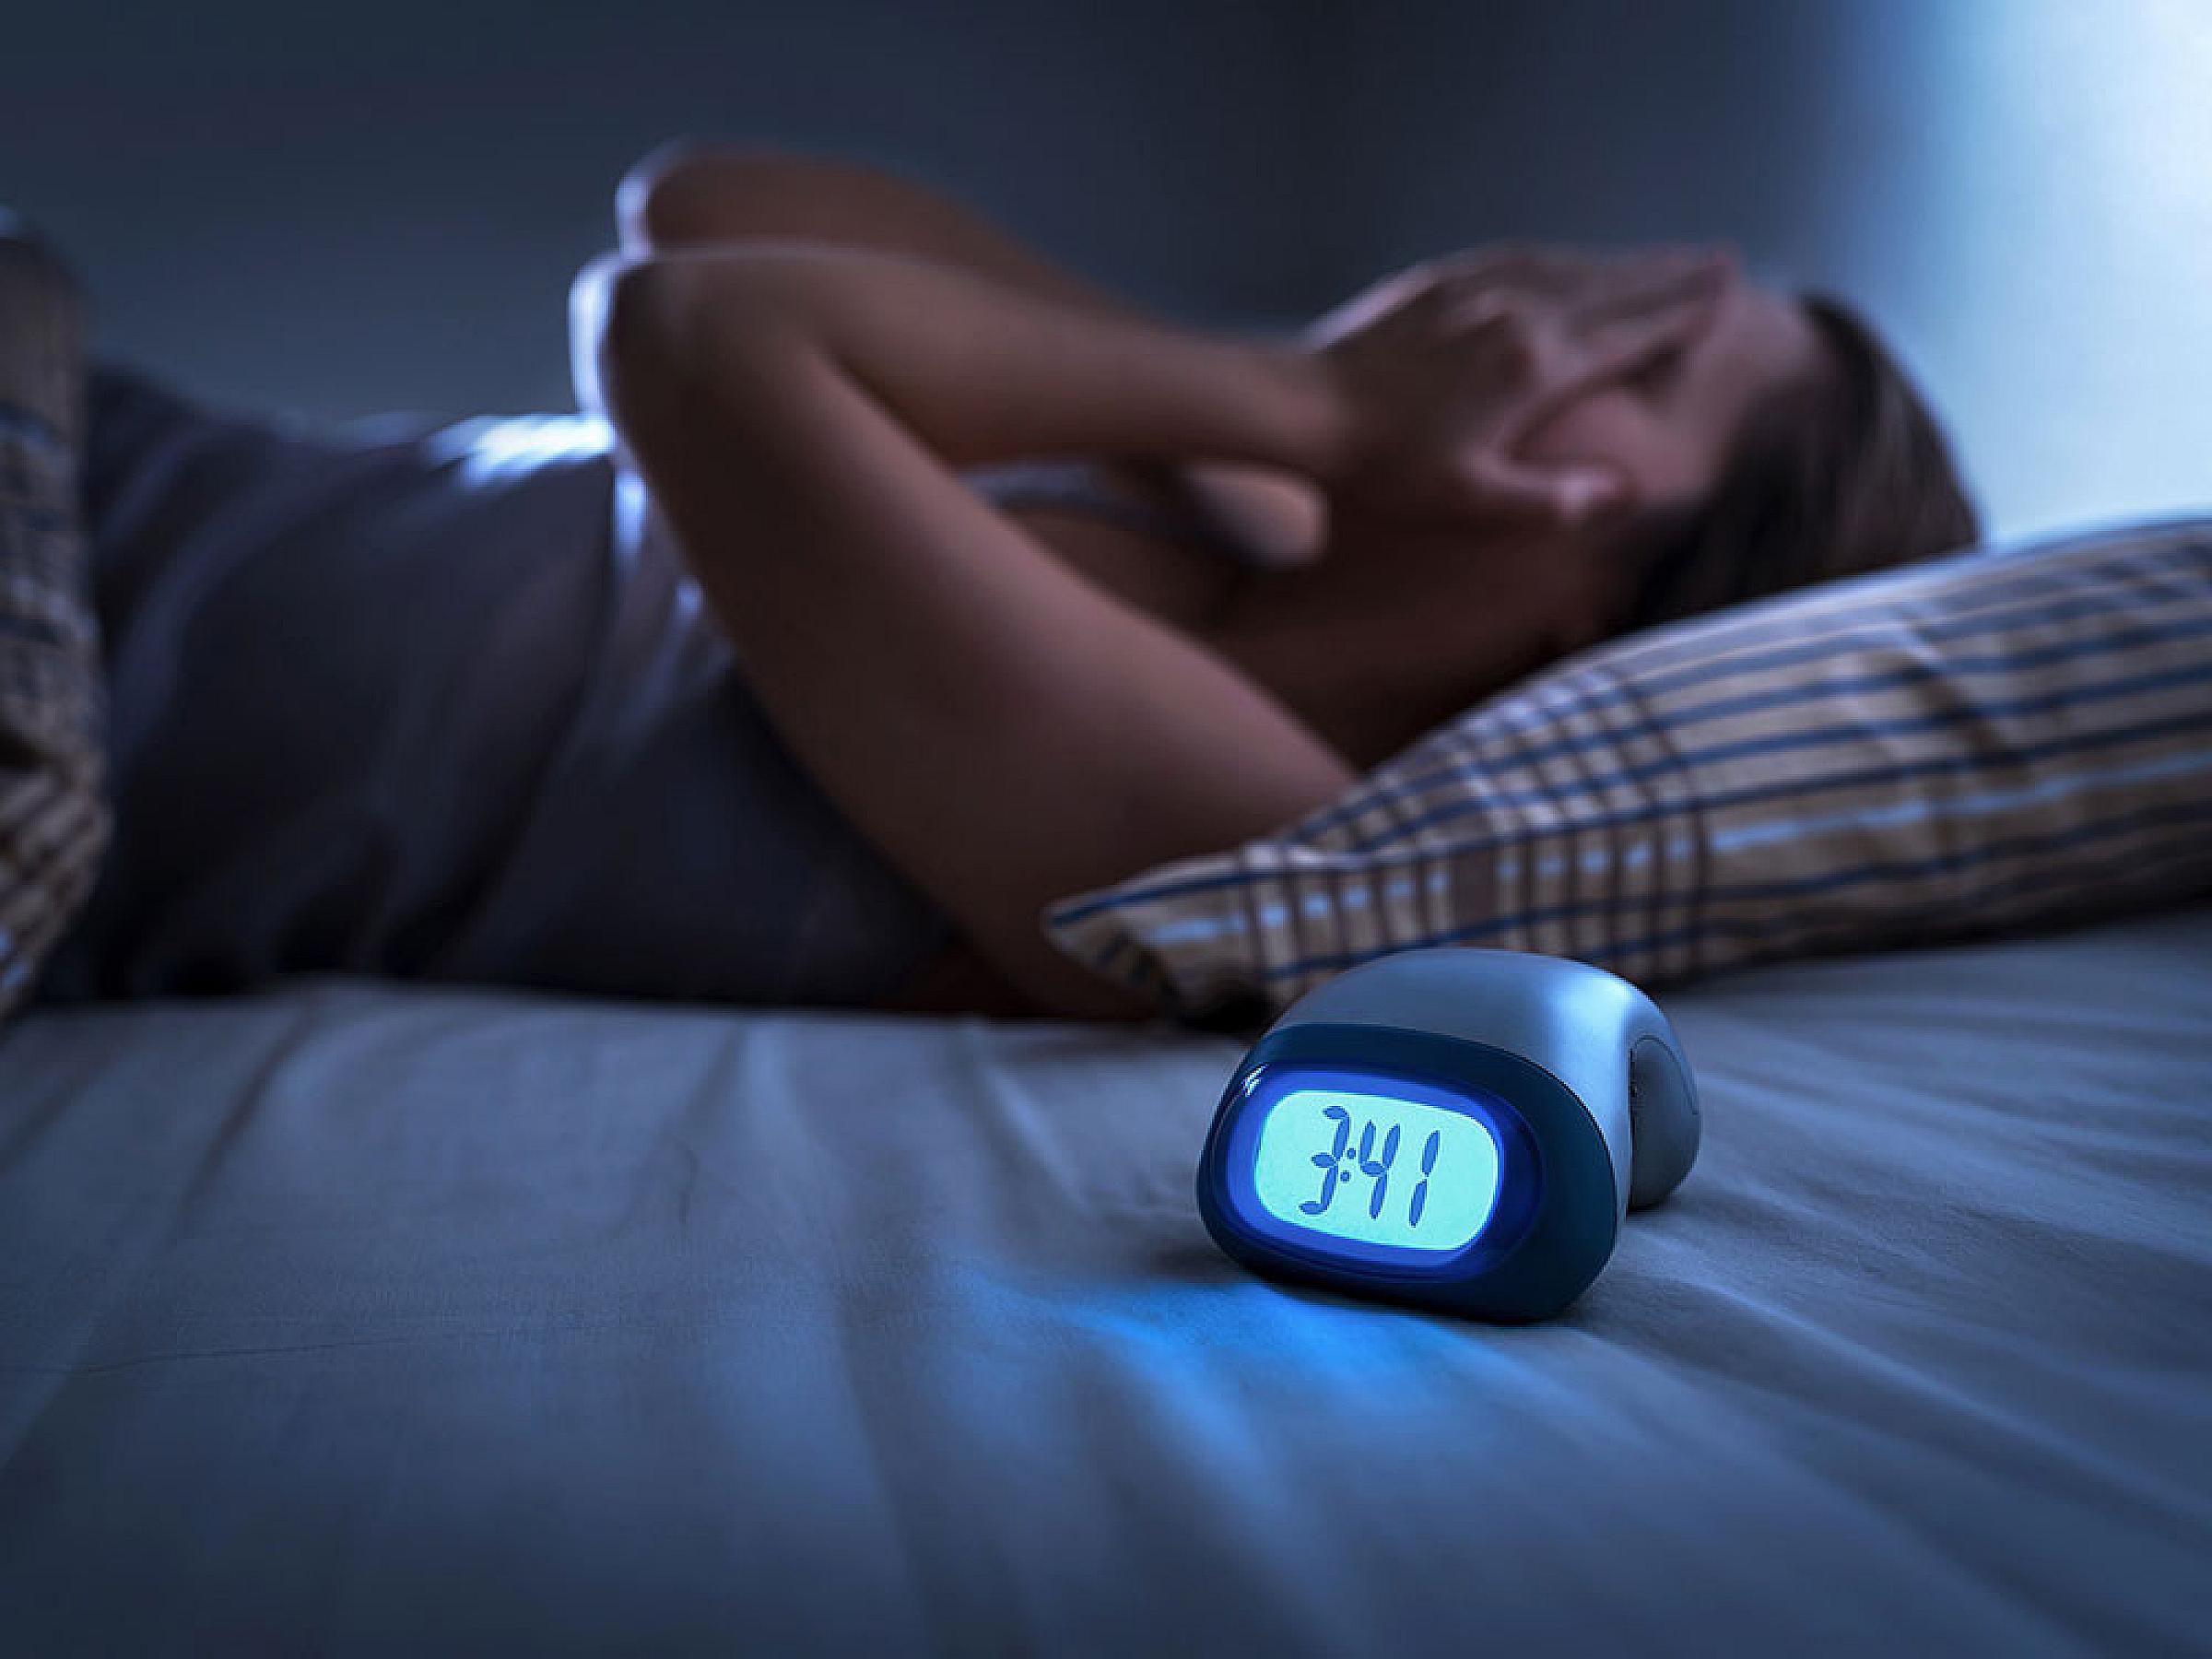 Woman lies in bed, covering face, while clock shows 3:41am